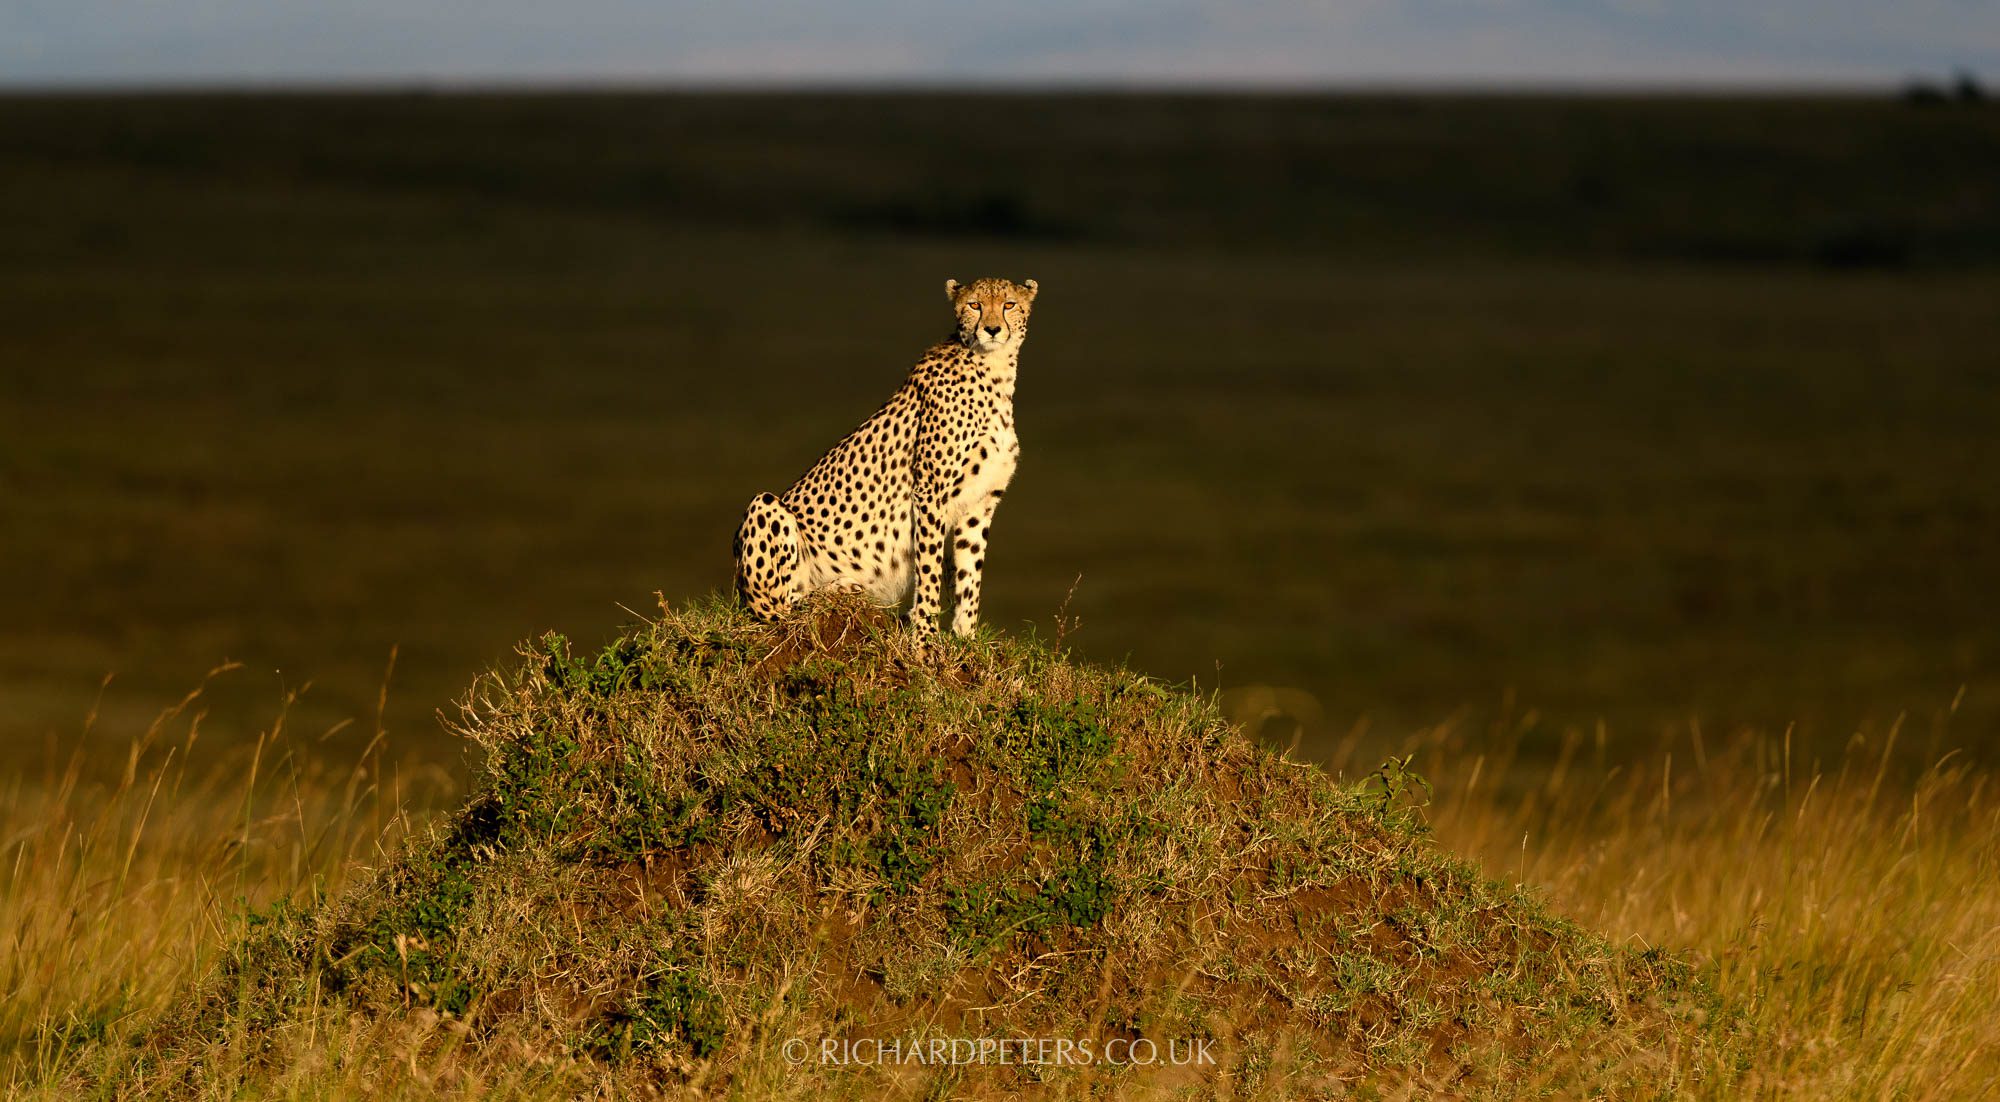 Cheetah at sunset, 500 PF with D850